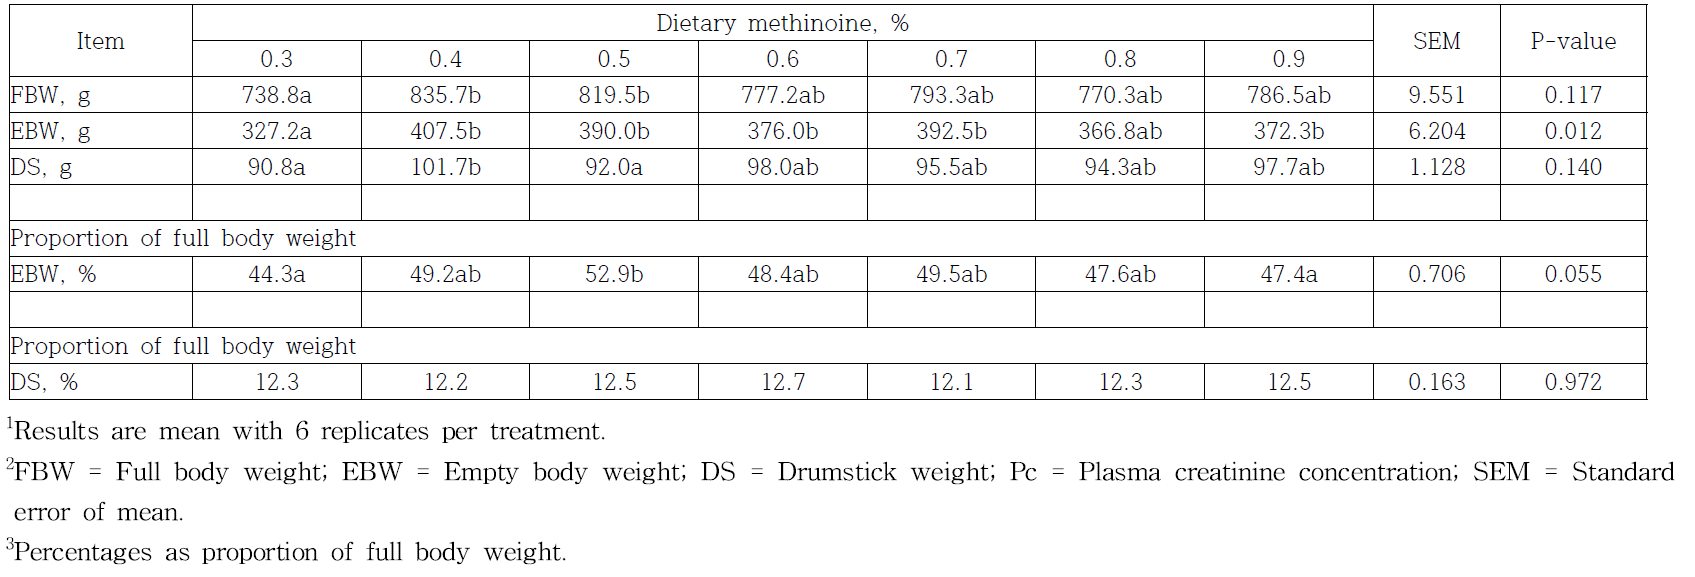 Effect of dietary methionine content on carcass characters and plasma creatinine concentration of male Korean native ducks from 1 to 21 days of age